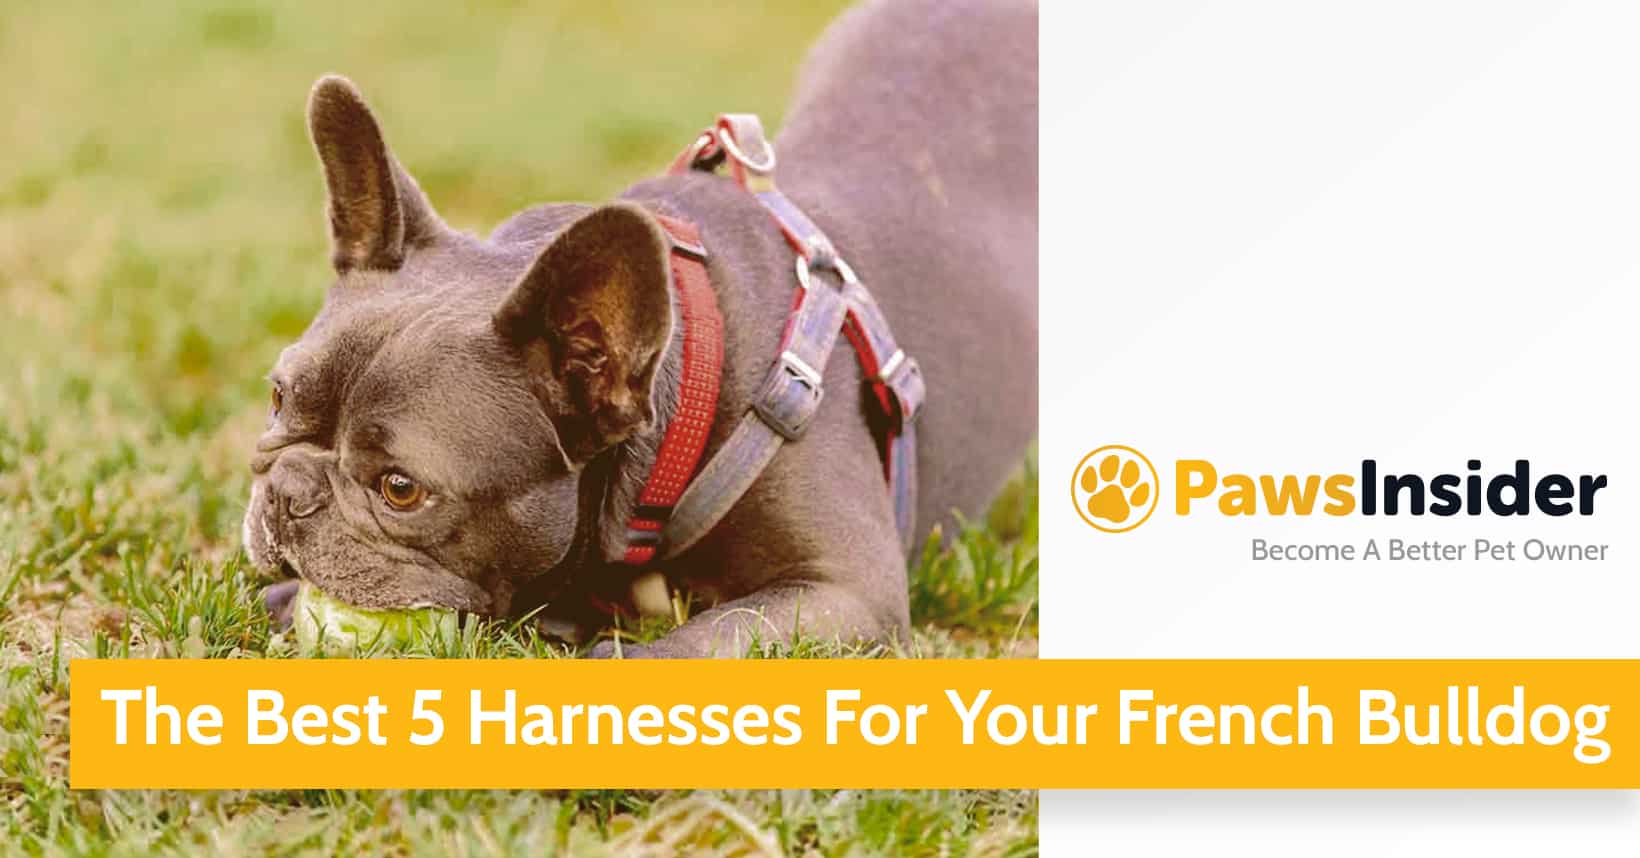 Pawsace Luxury French Bulldog No - Pull Dog Harness, Collar and